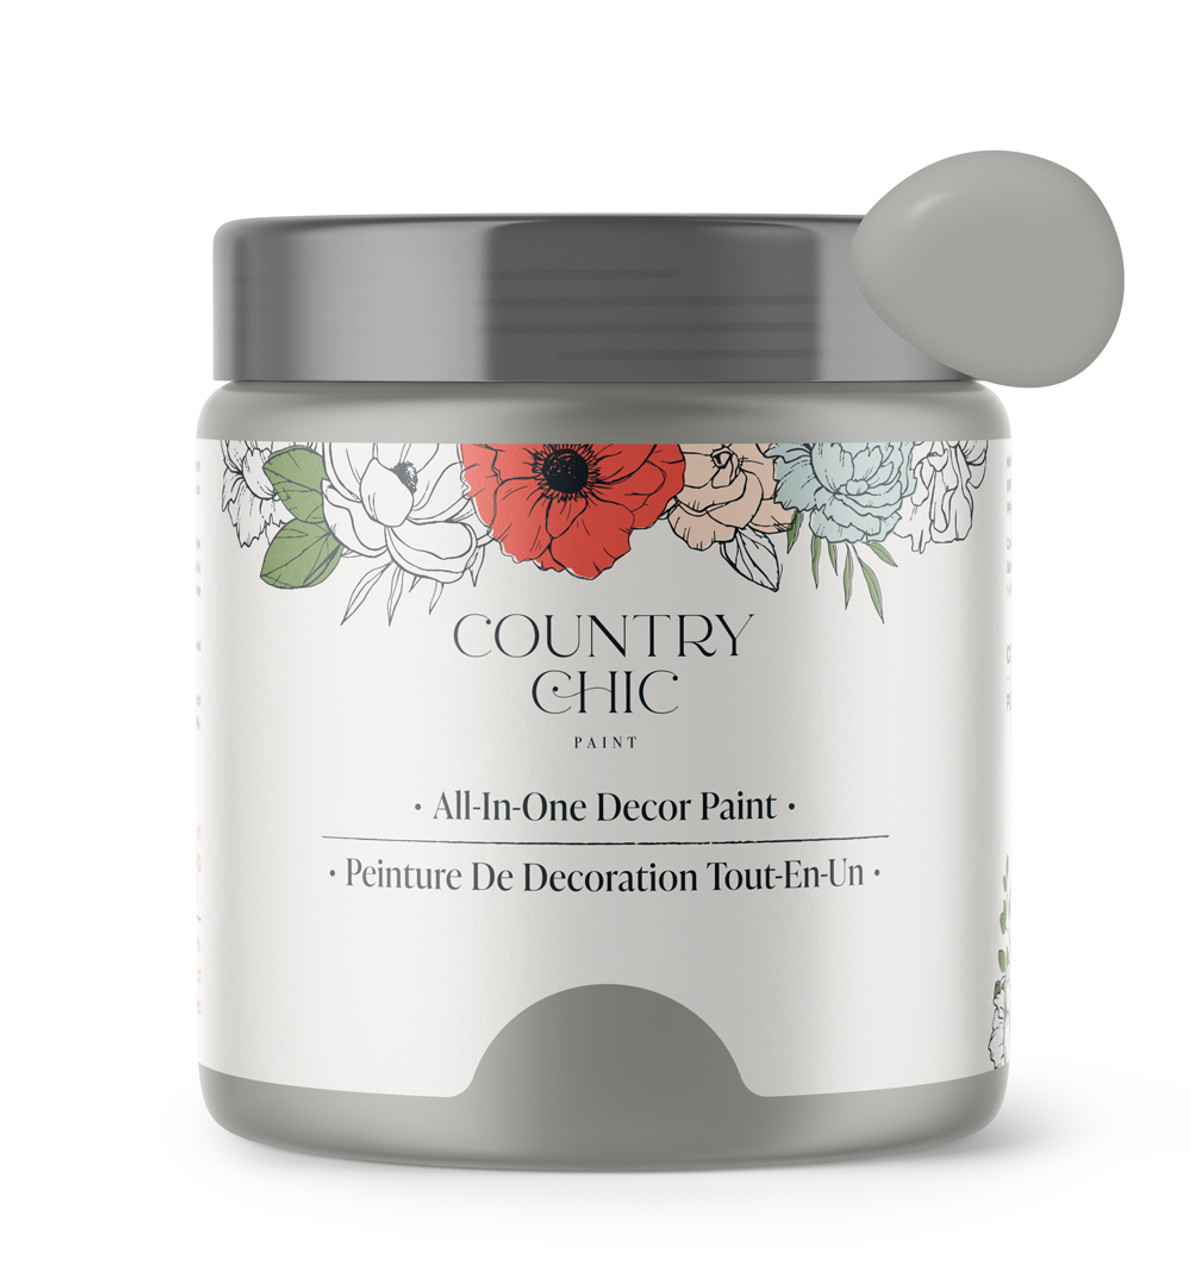 Pebble Beach - Chalk Style Paint for Furniture, Home Decor, DIY, Cabinets,  Crafts - Eco-Friendly All-In-One Paint